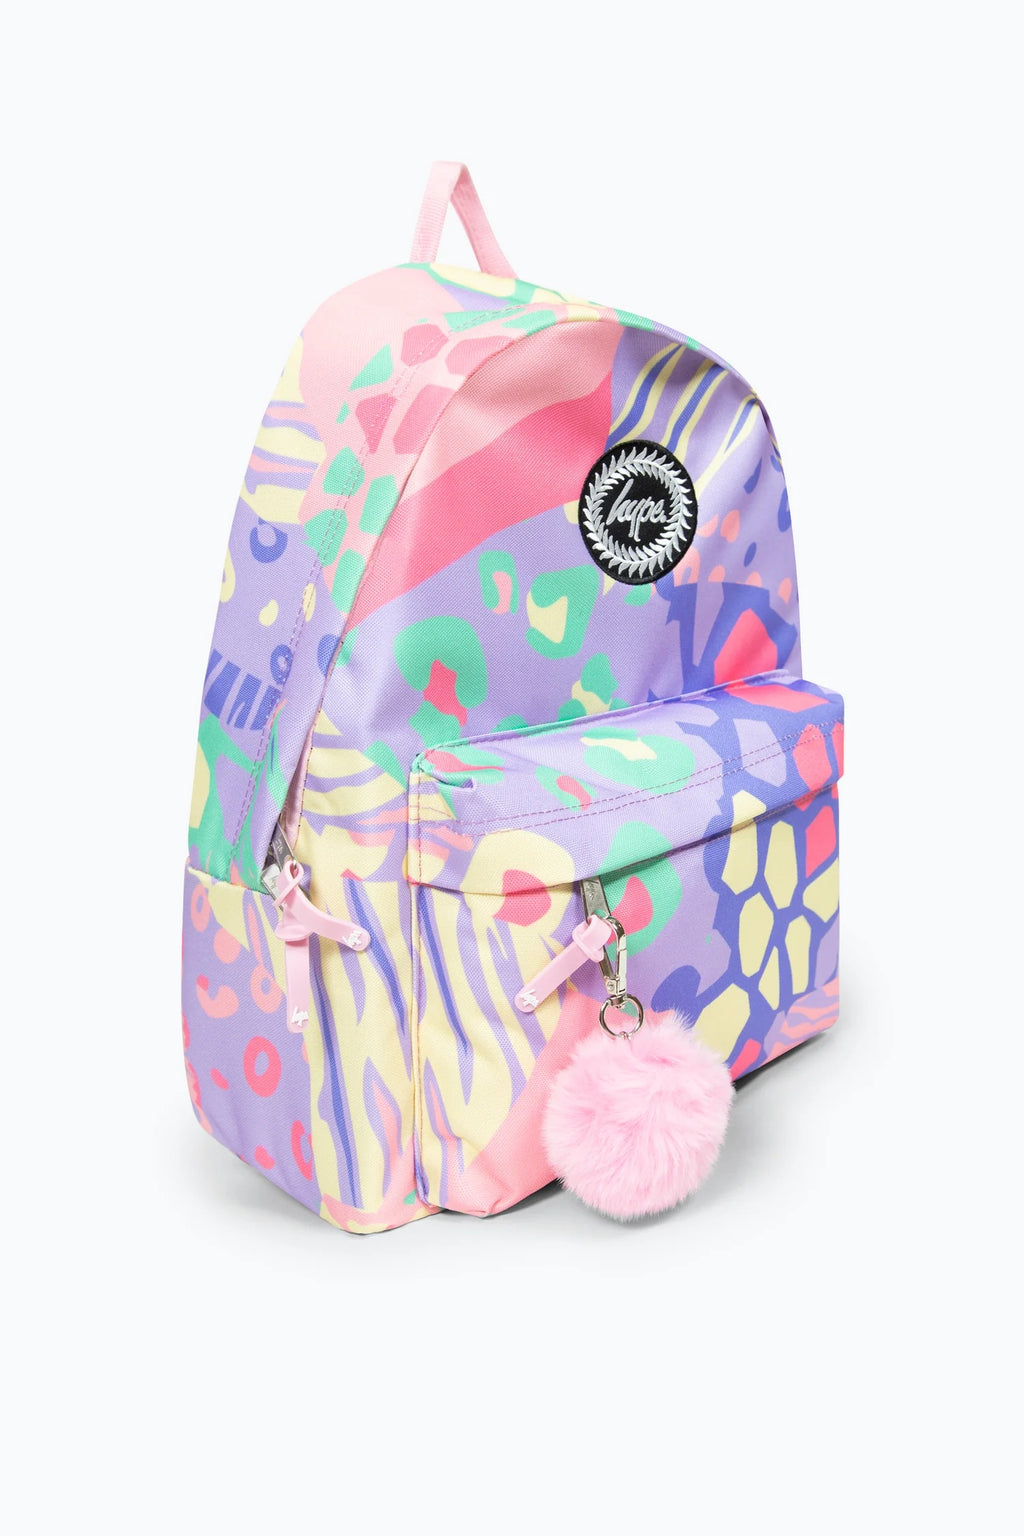 Hype Girls Multicoloured Pastel Prints Iconic Backpack